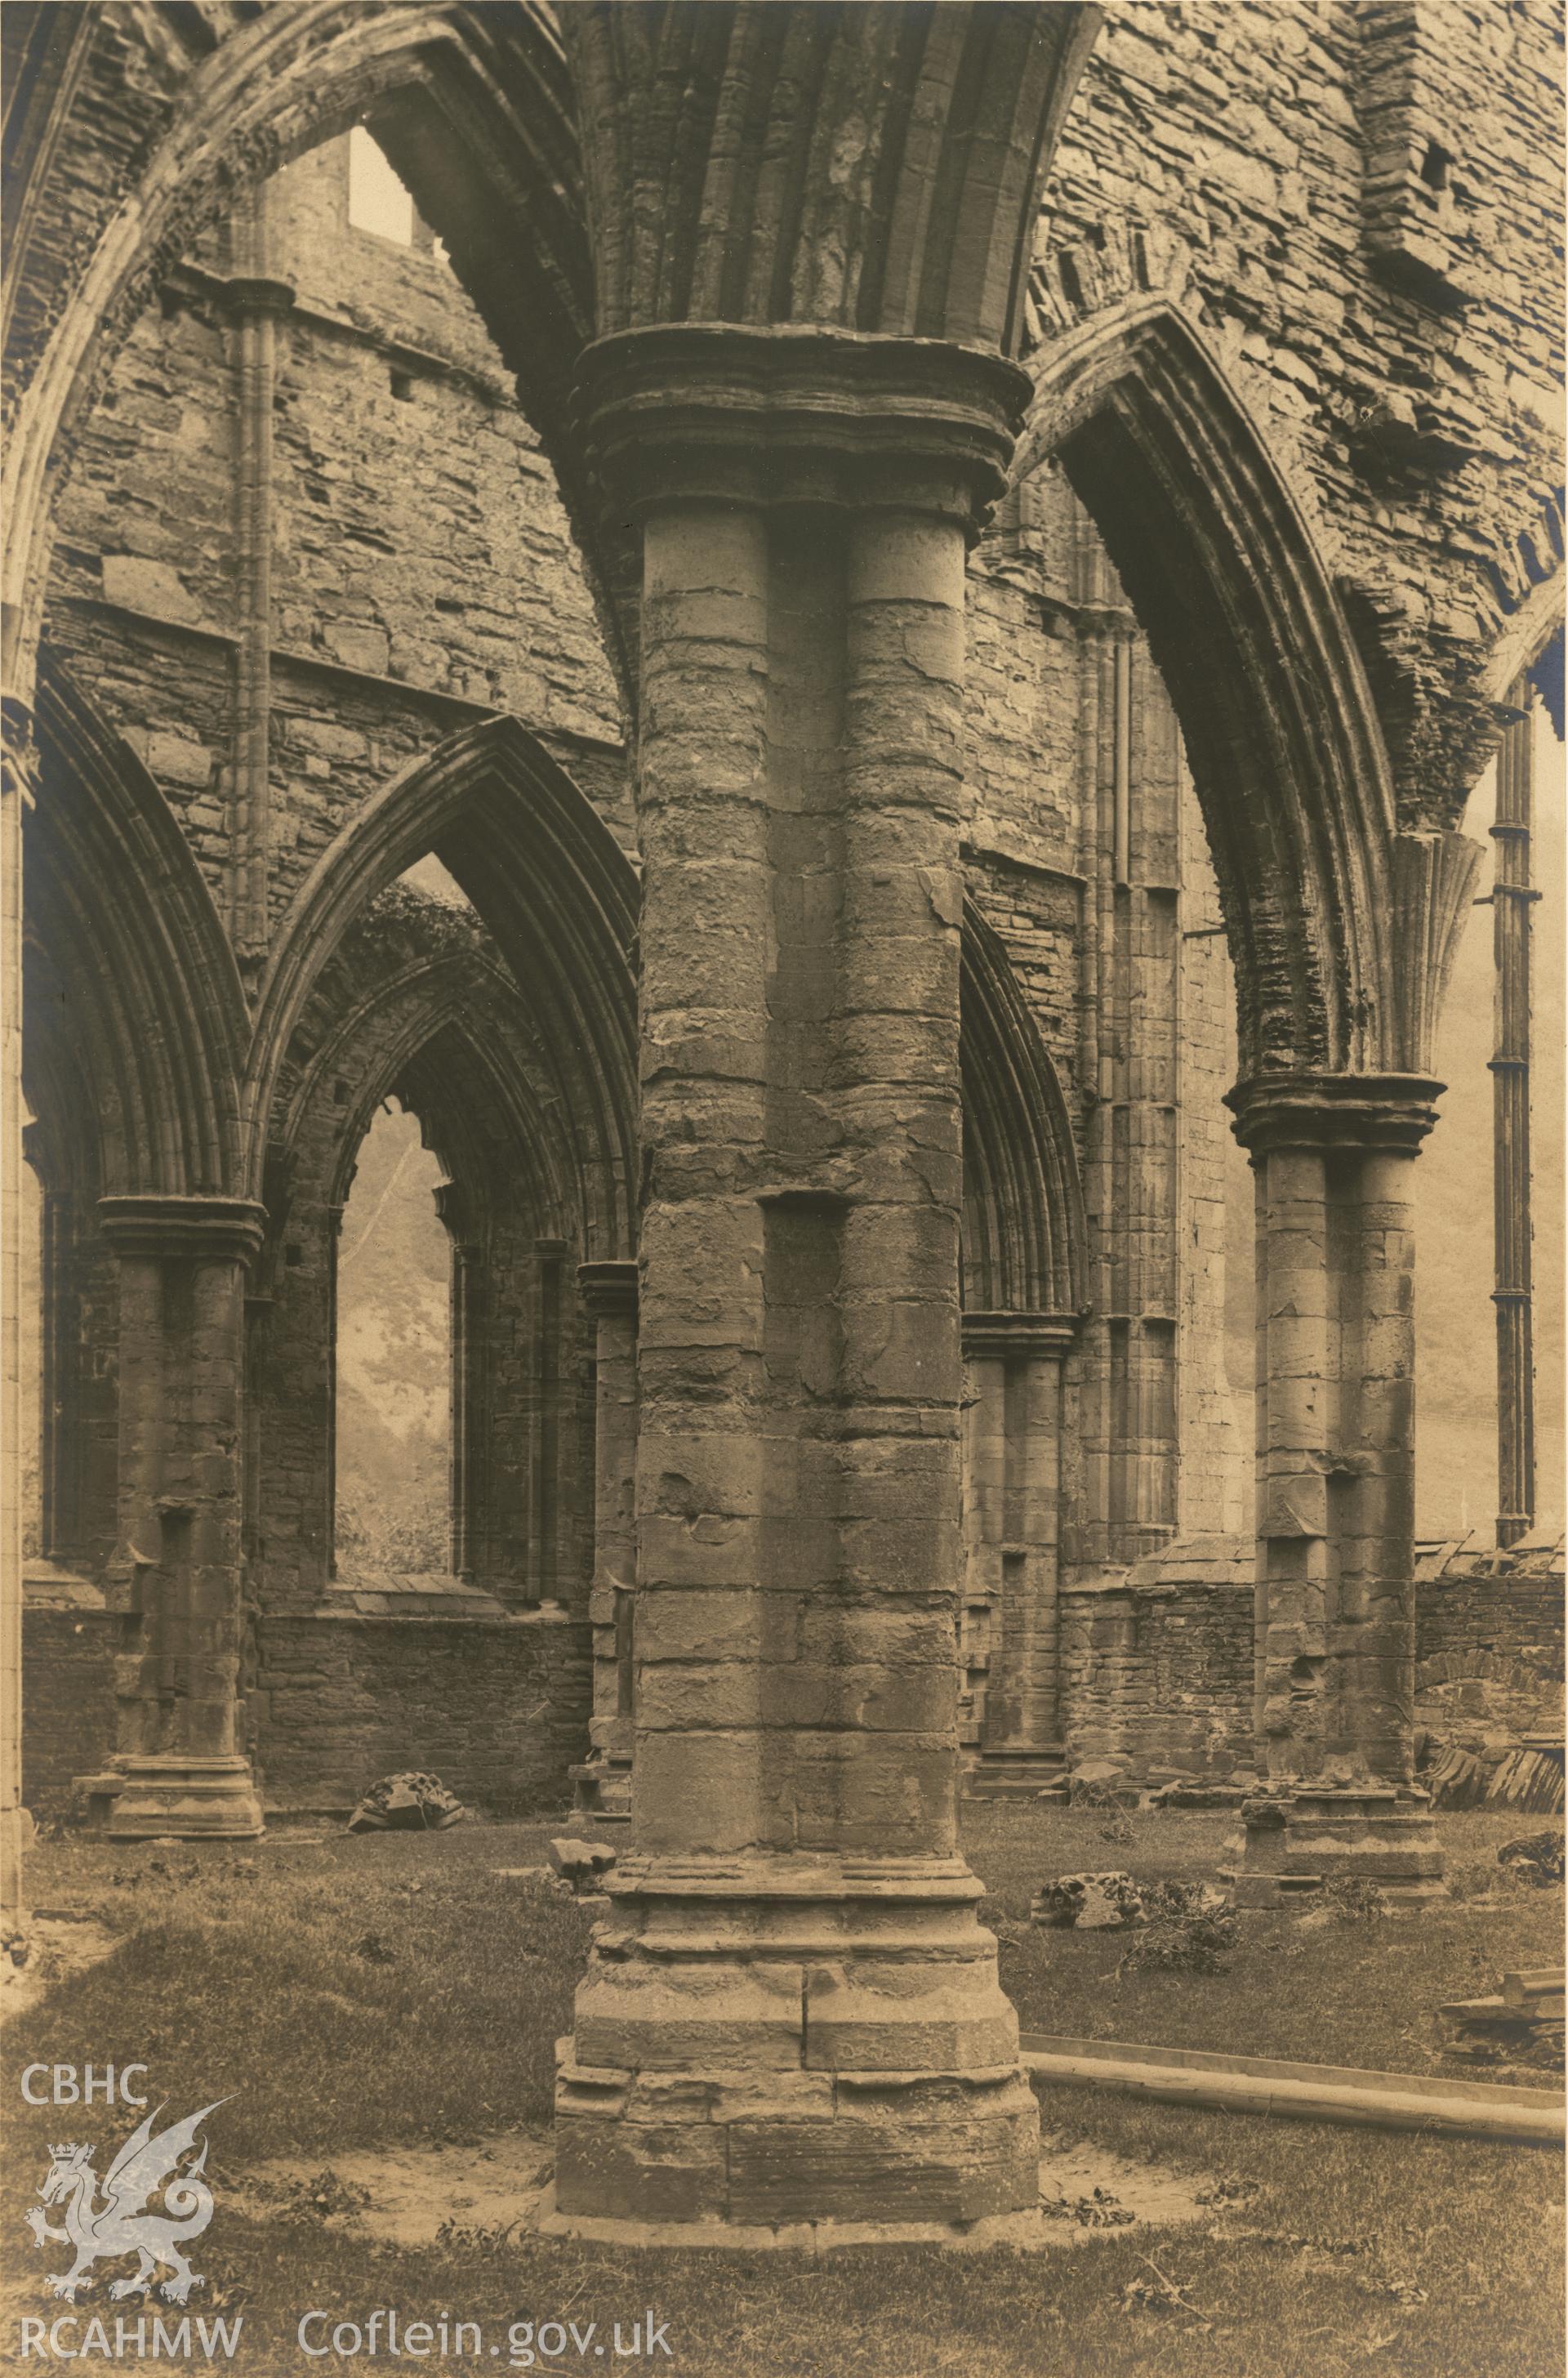 Digital copy of a view of the choir from the south transept at Tintern Abbey.